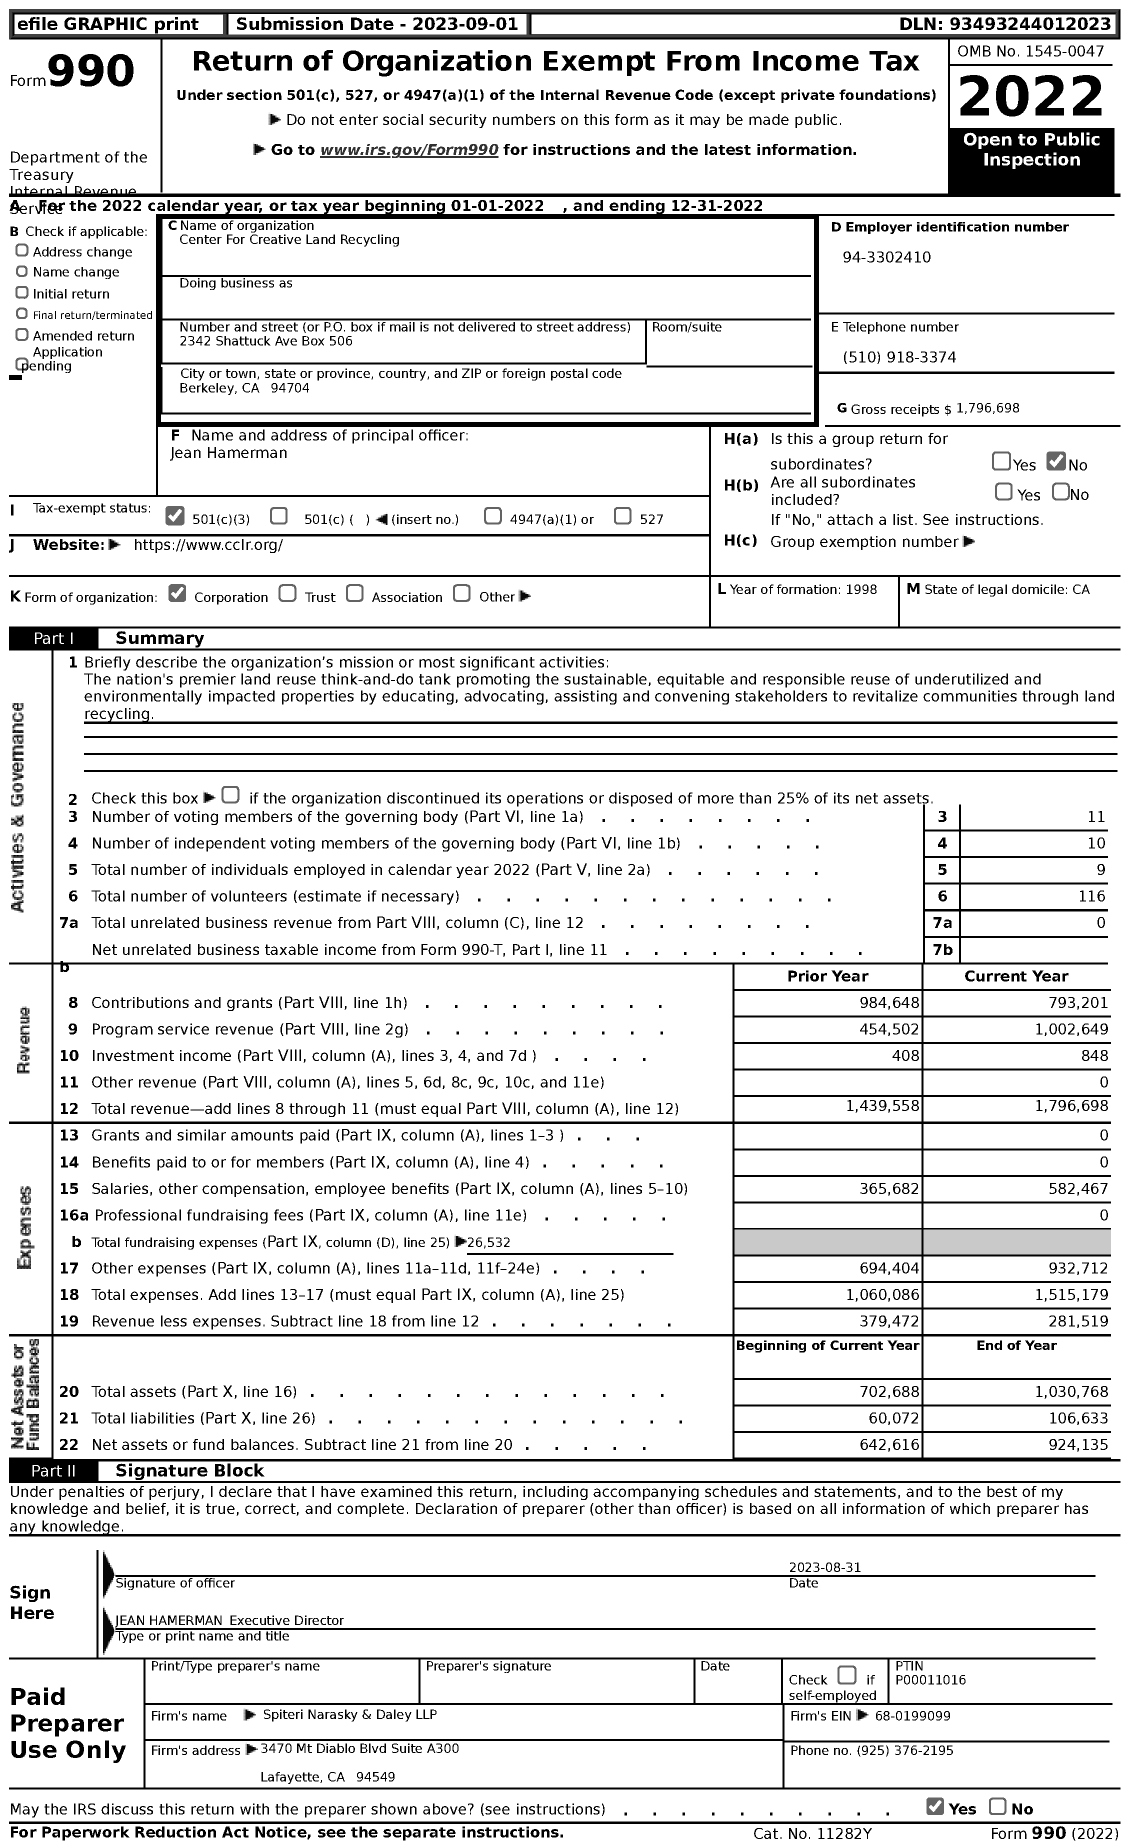 Image of first page of 2022 Form 990 for Center For Creative Land Recycling